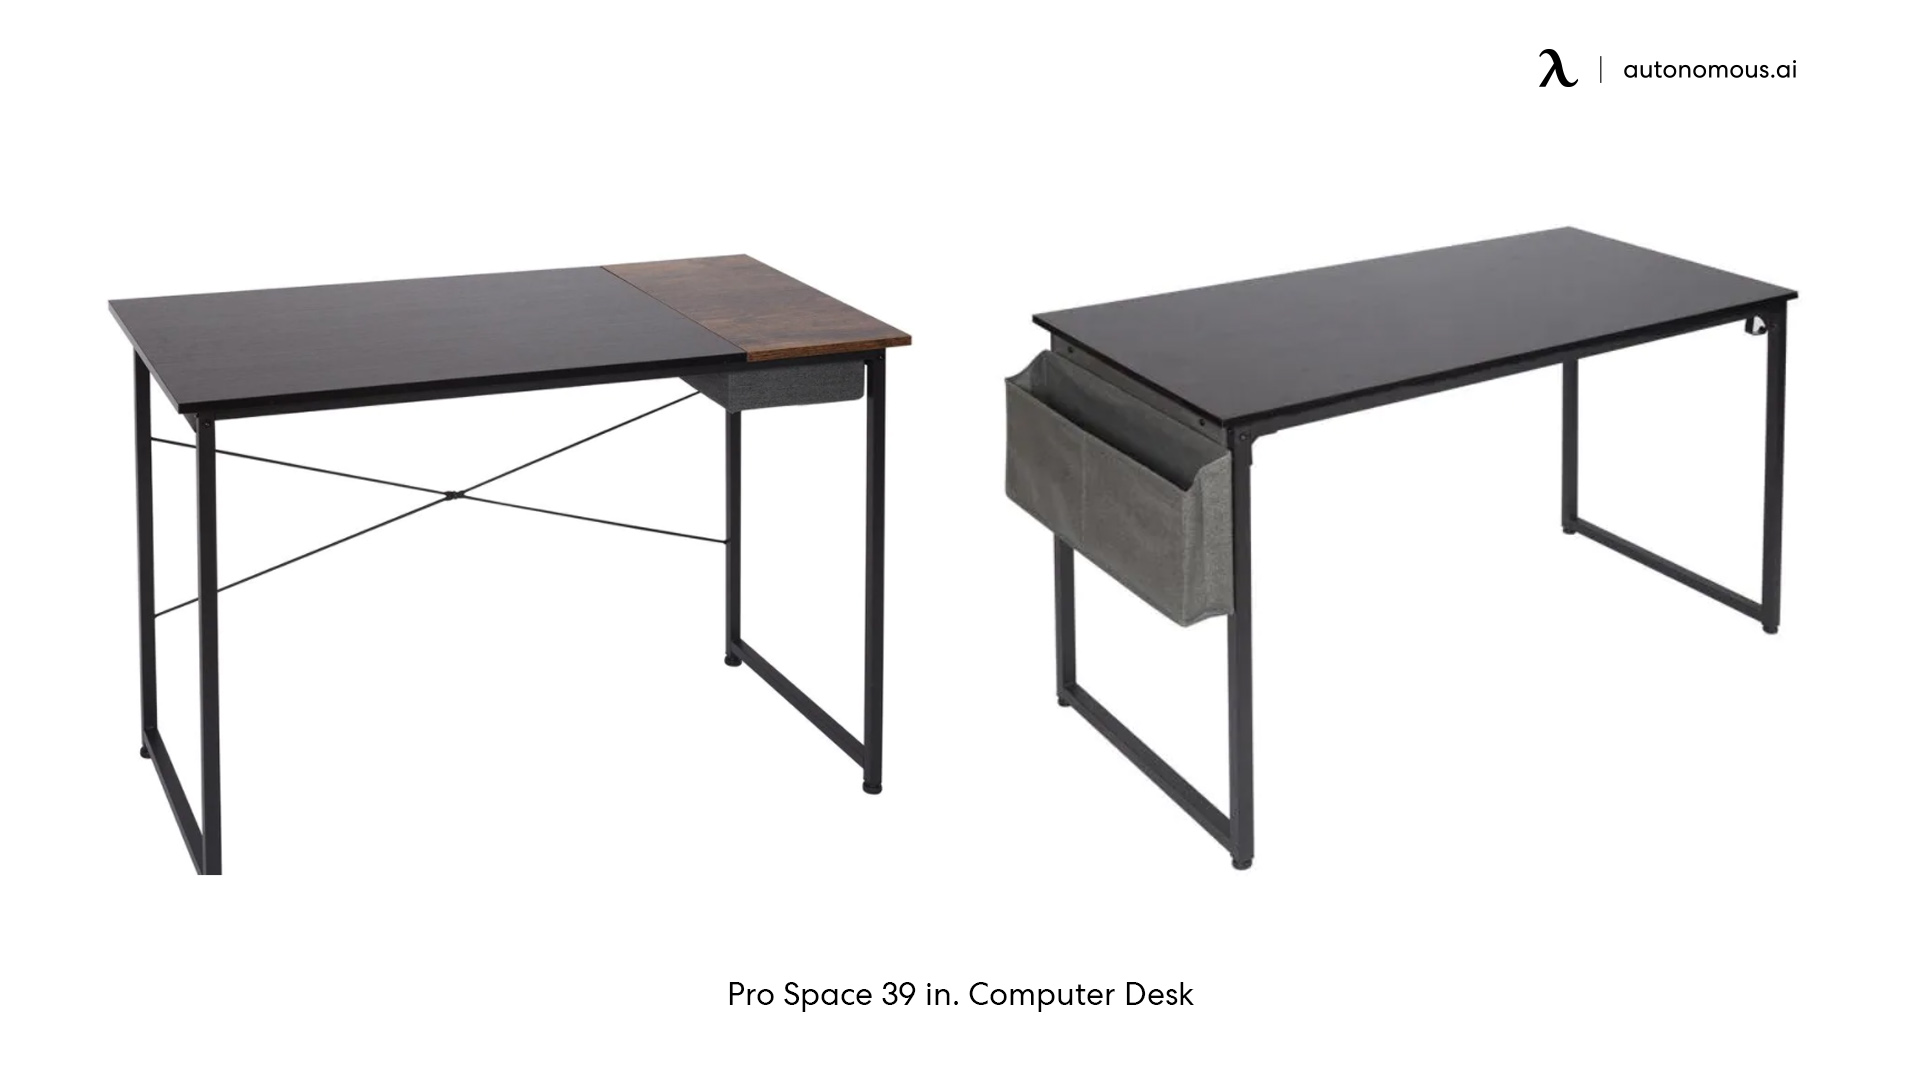 Pro Space 39 in. Computer Desk